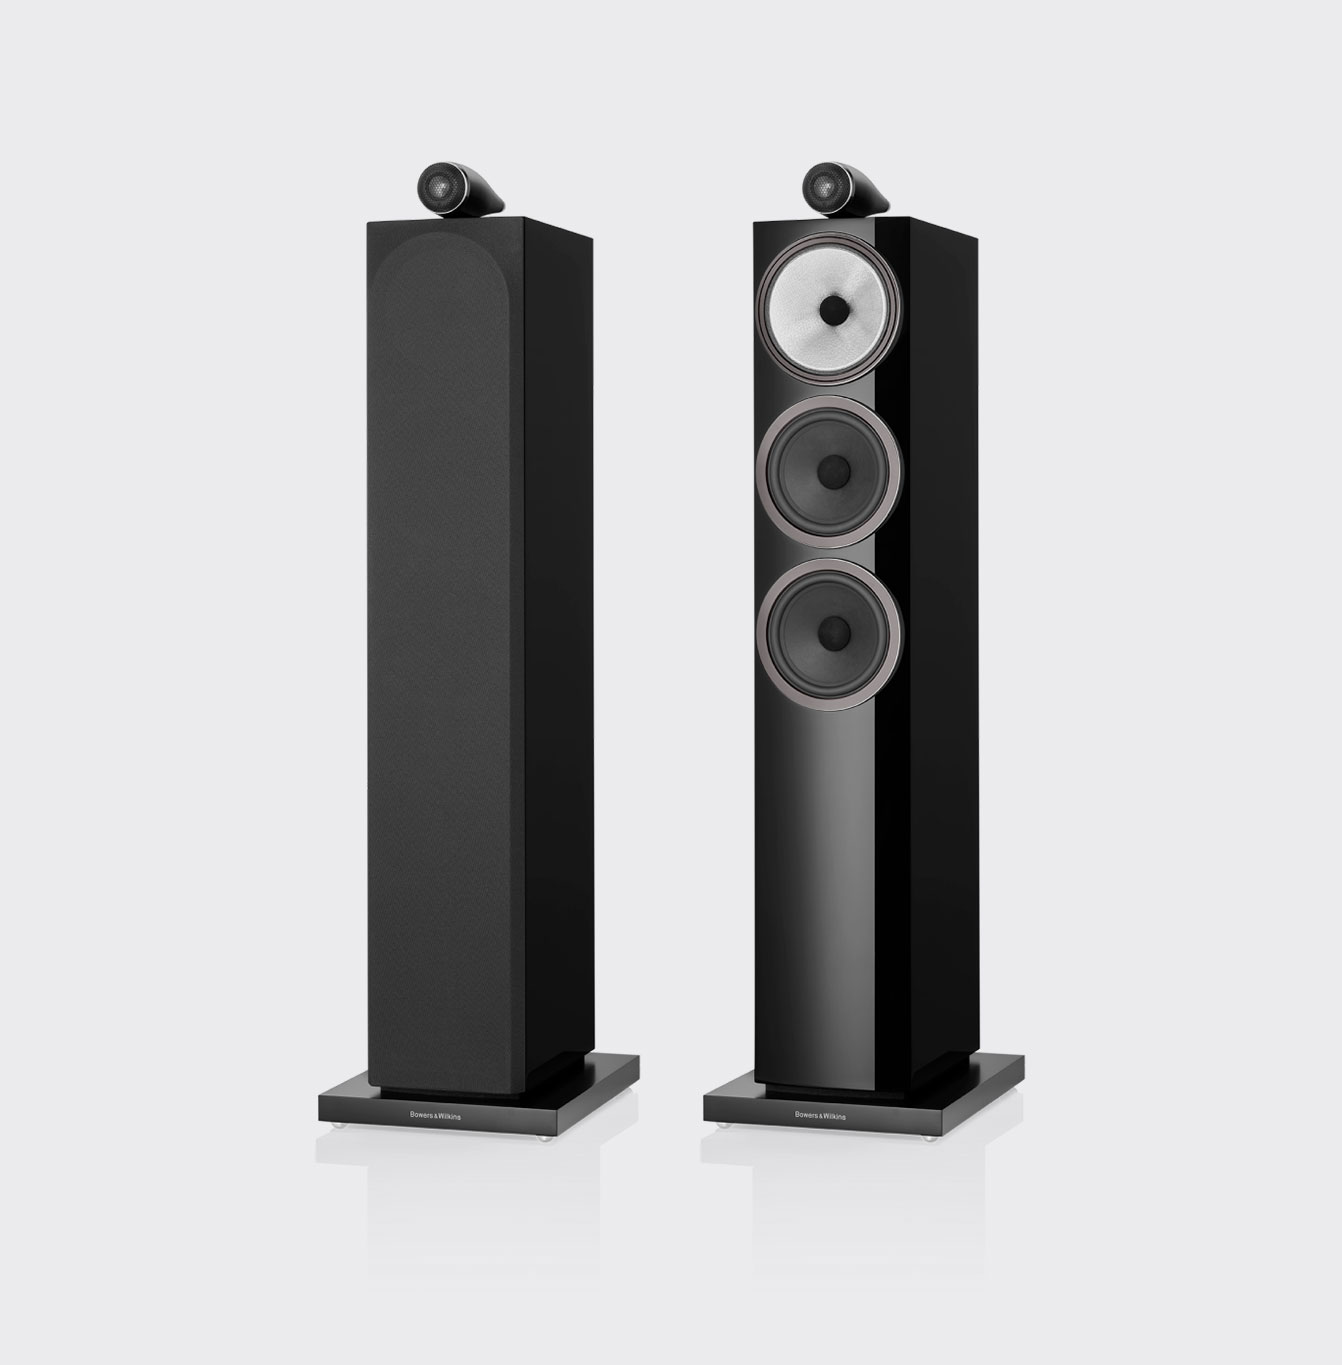 Bowers & Wilkins 703 S3